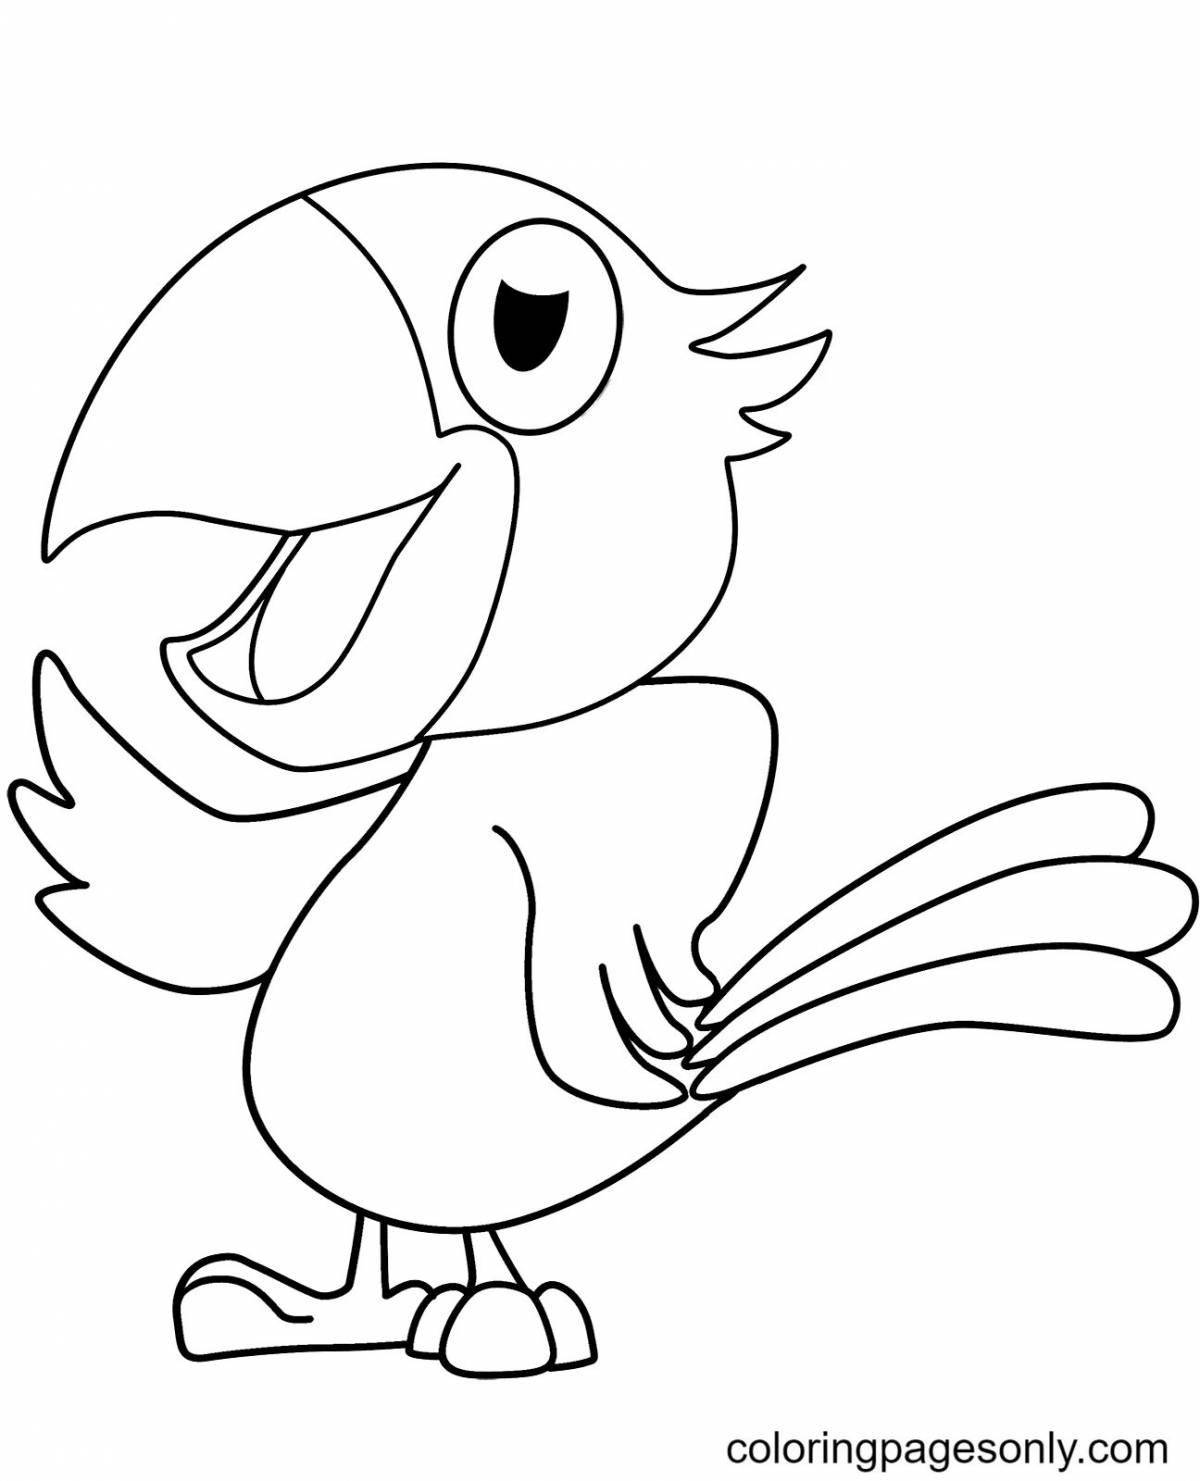 Live parrot coloring book for kids